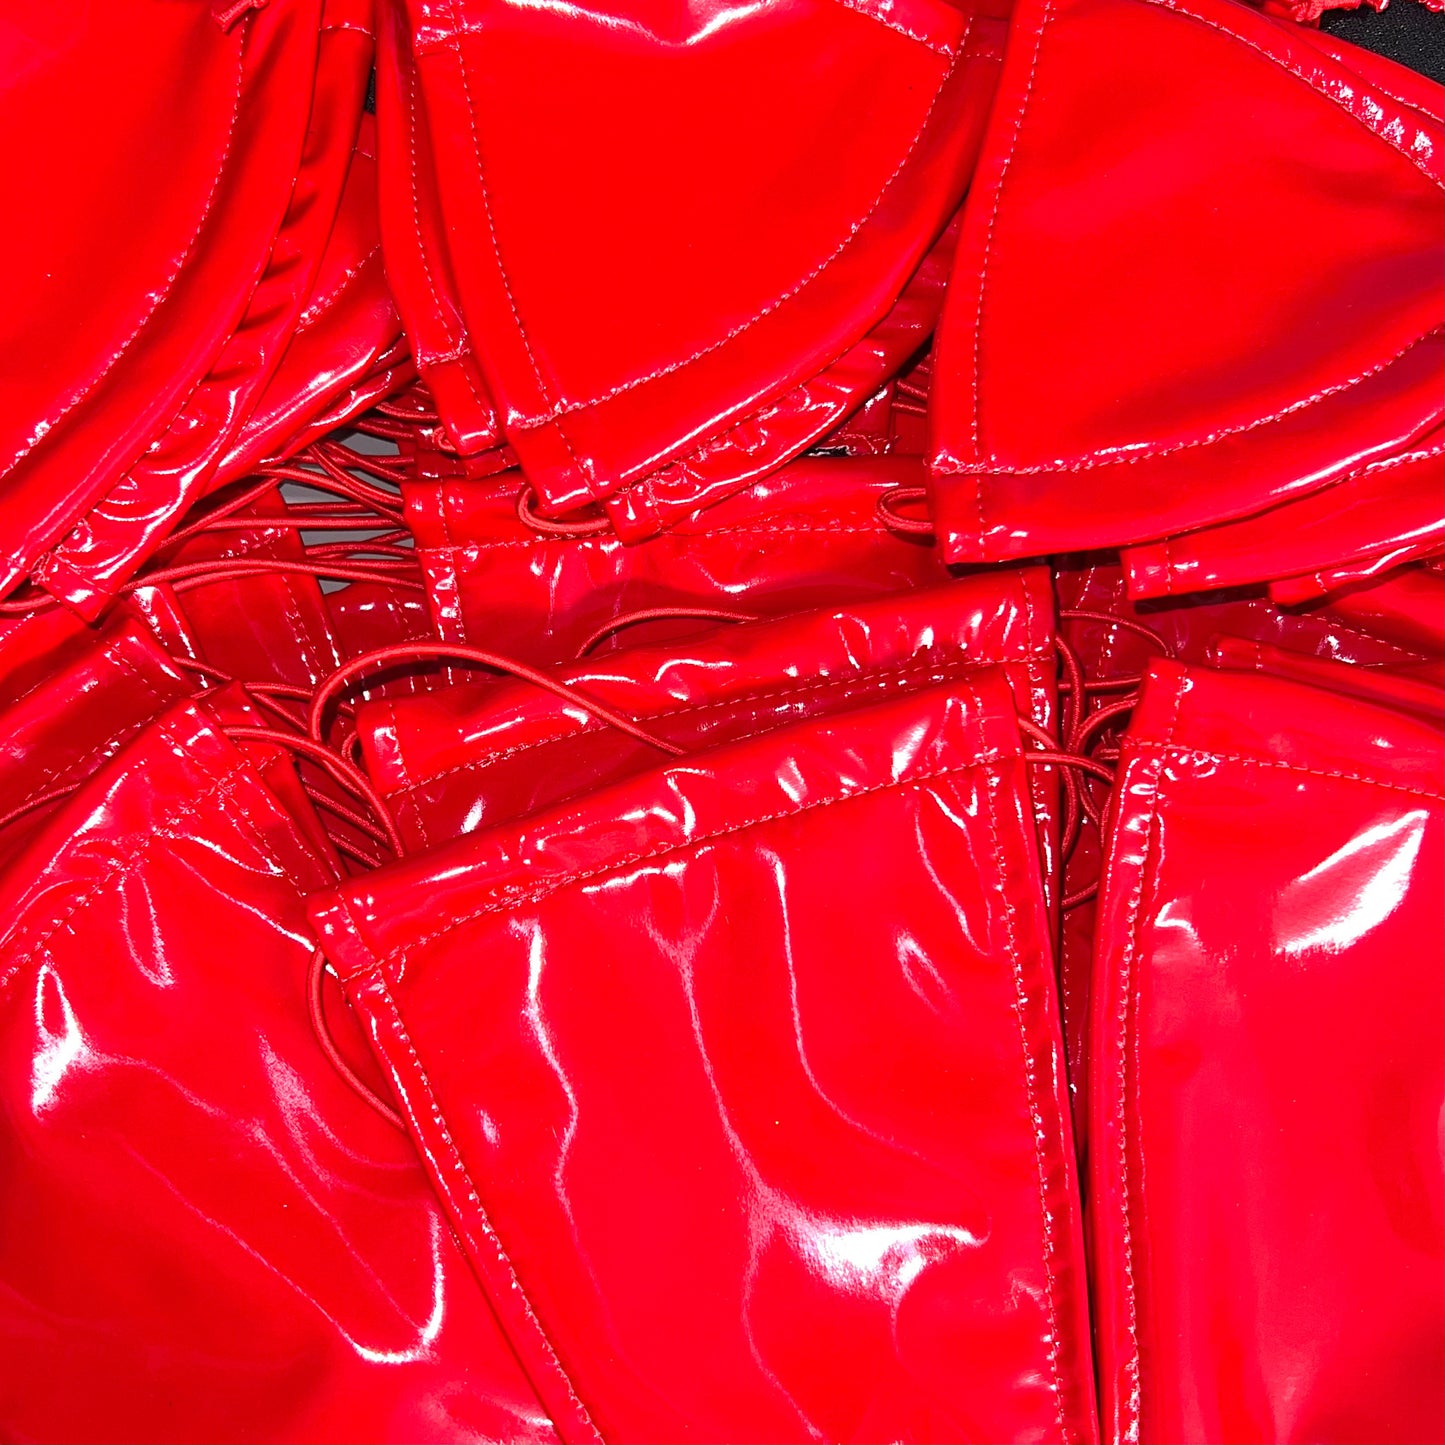 ACE Tieable Microkini: Latex Ring the Alarm Red